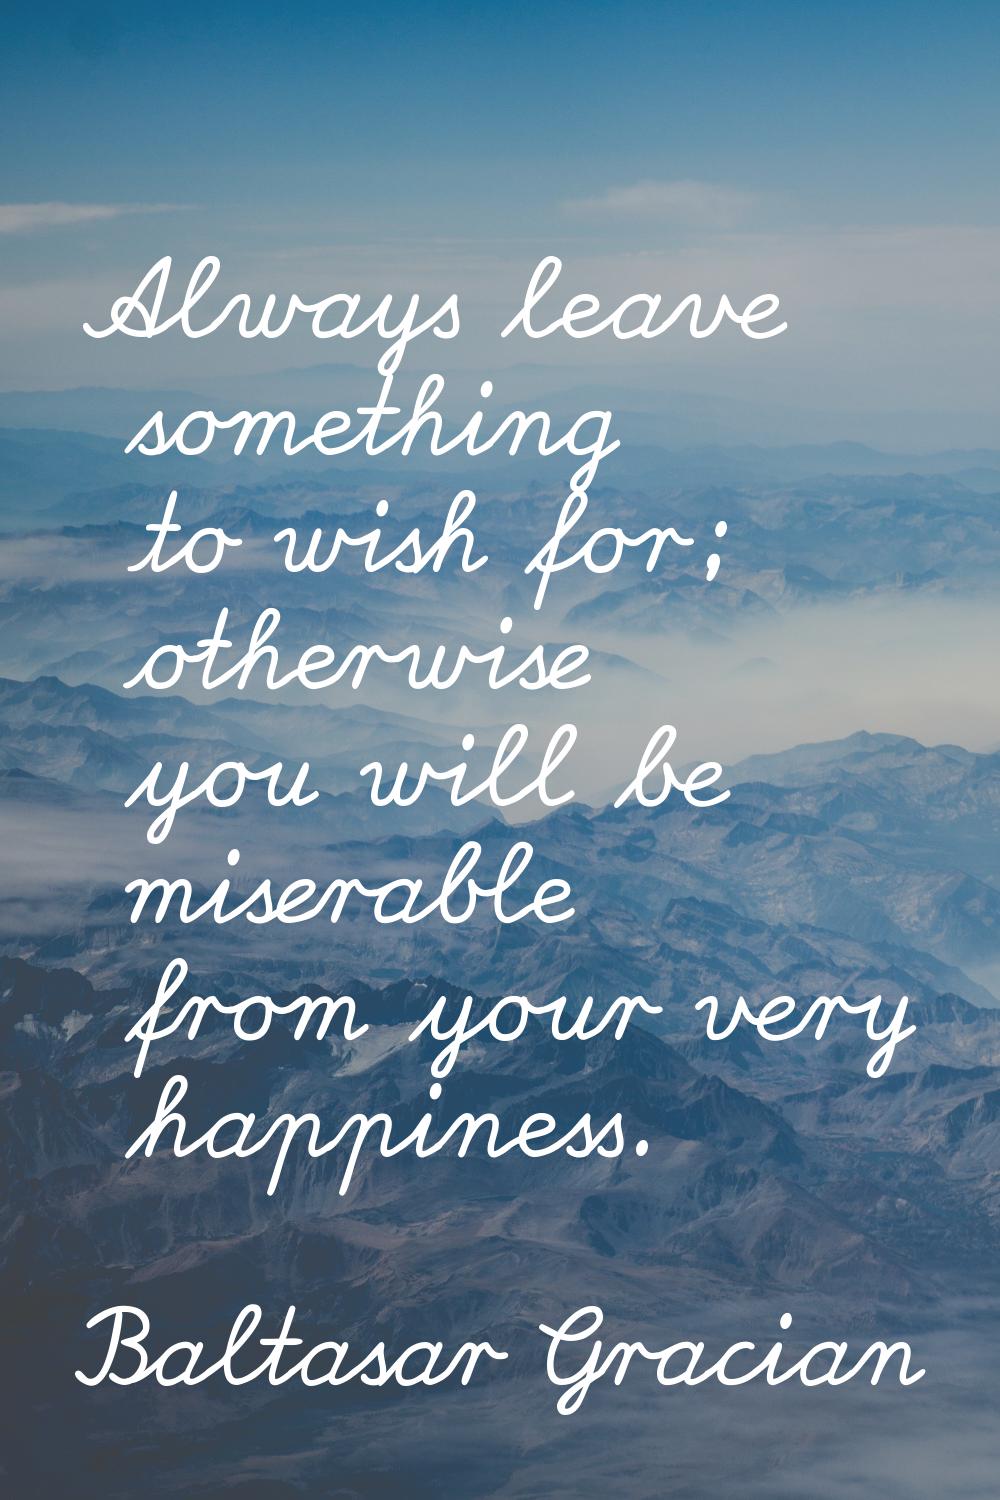 Always leave something to wish for; otherwise you will be miserable from your very happiness.